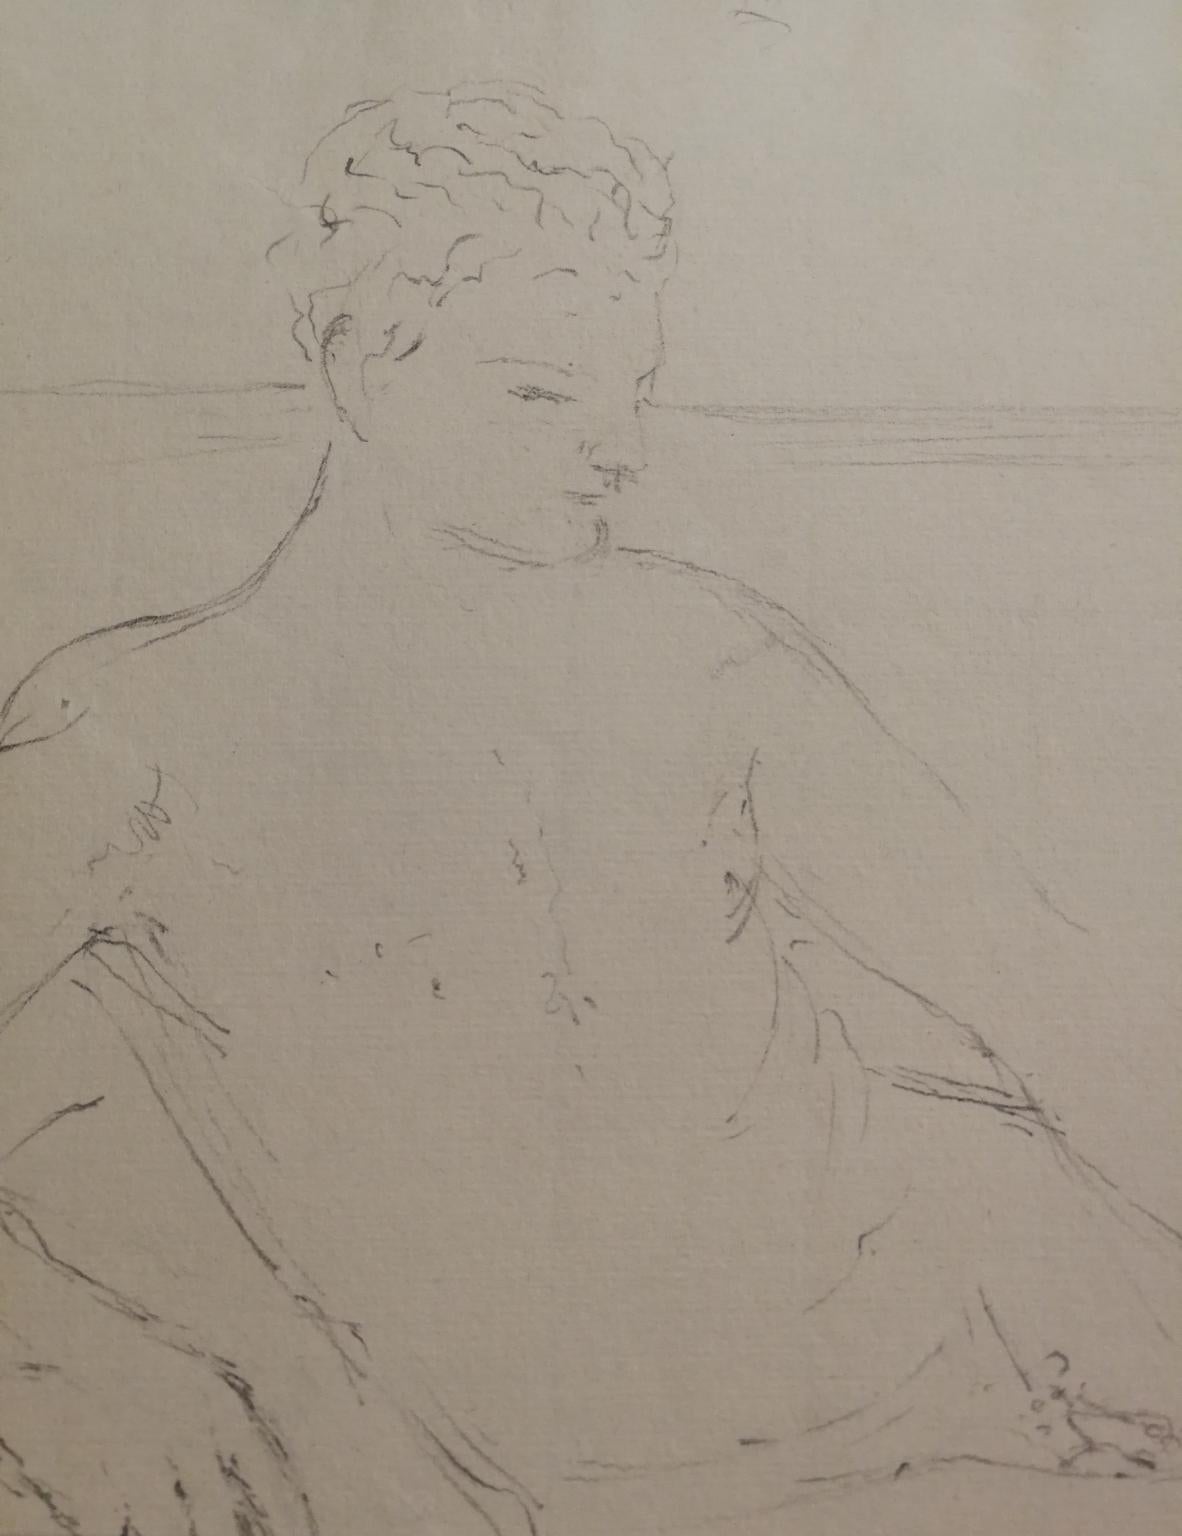 Signed Colacicchi Male Nude Drawing Mid-20 century pencil on paper  - Art by Giovanni Colacicchi